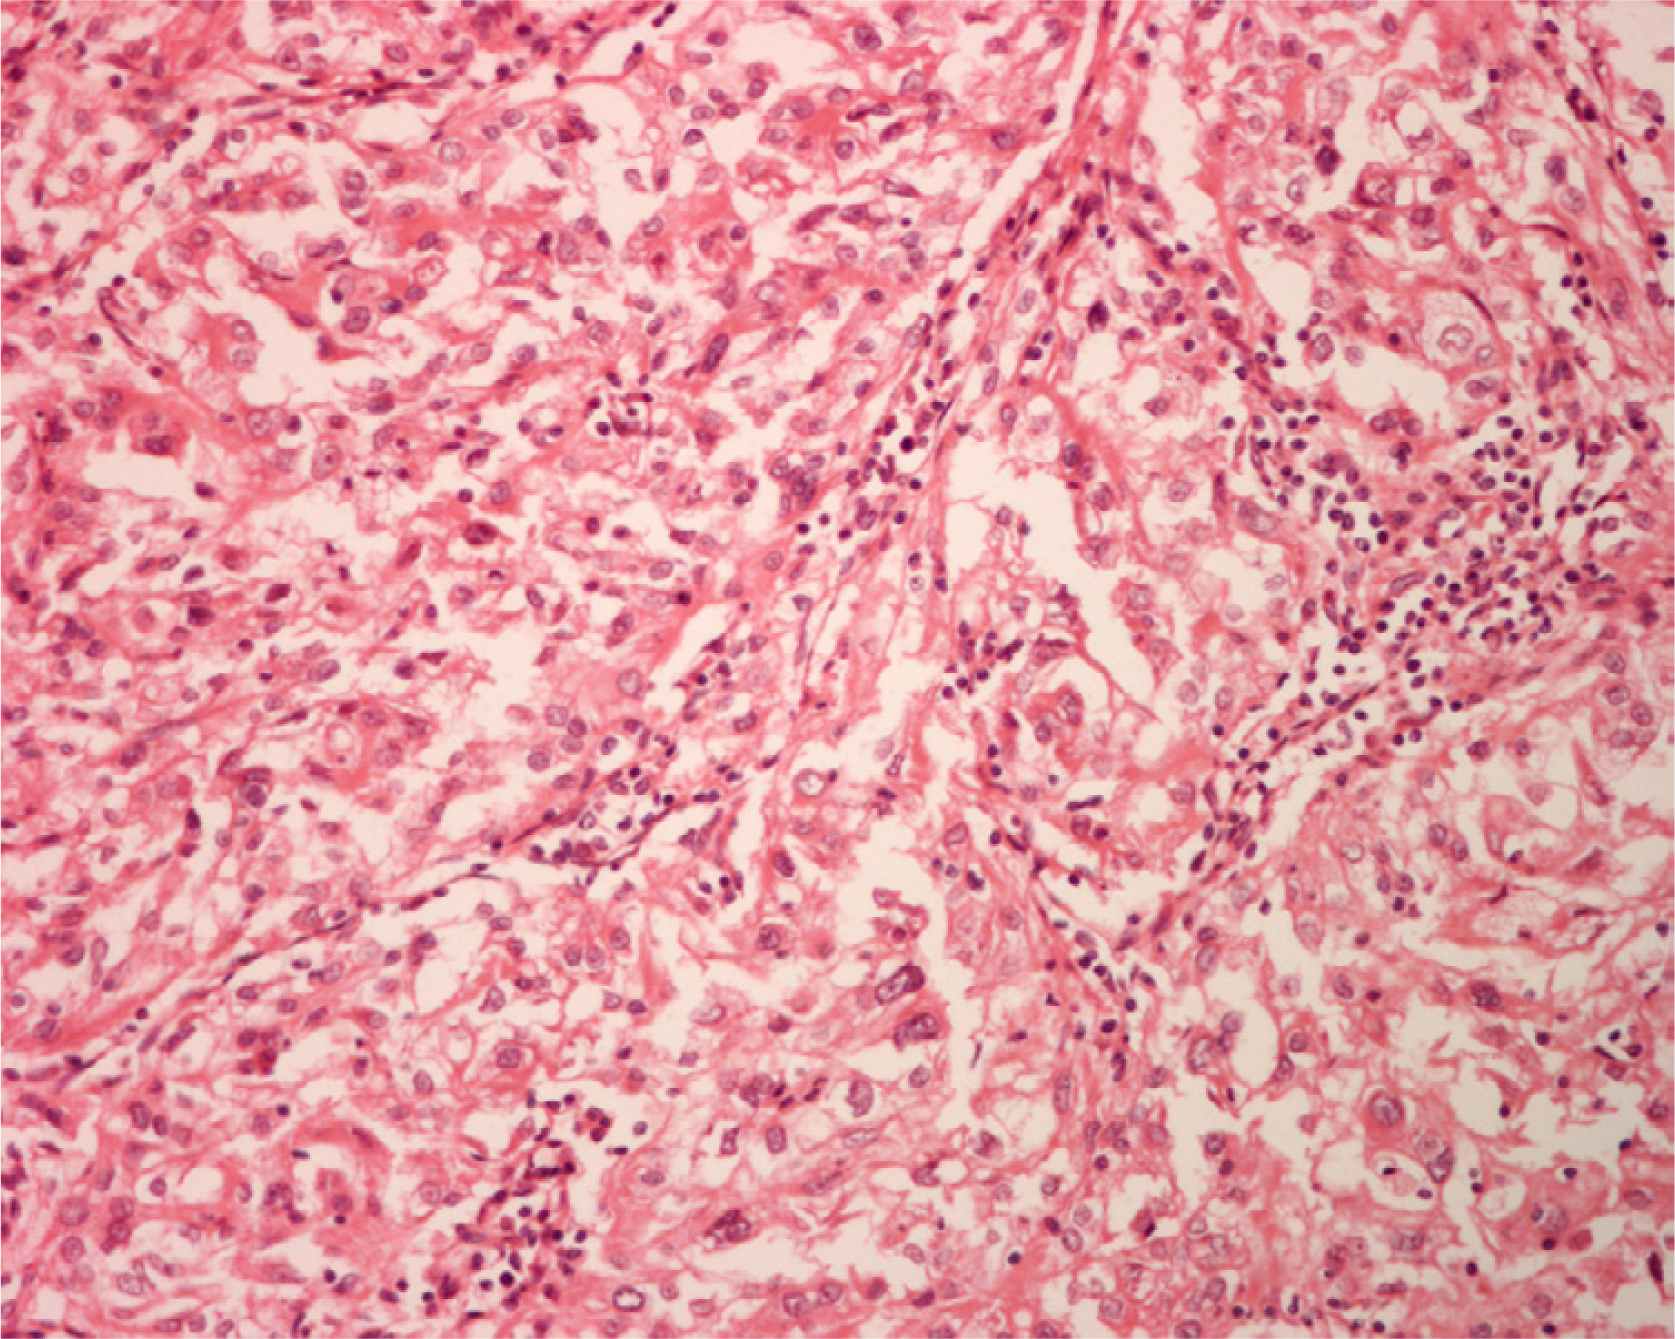 Histology of a renal cell carcinoma, clear cell type, metastatic to the thyroid in patient 3 shows tumor cells with granular cytoplasm, oval nuclei and conspicuous nucleoli arranged in glandular pattern (hematoxylin and eosin, × 250).